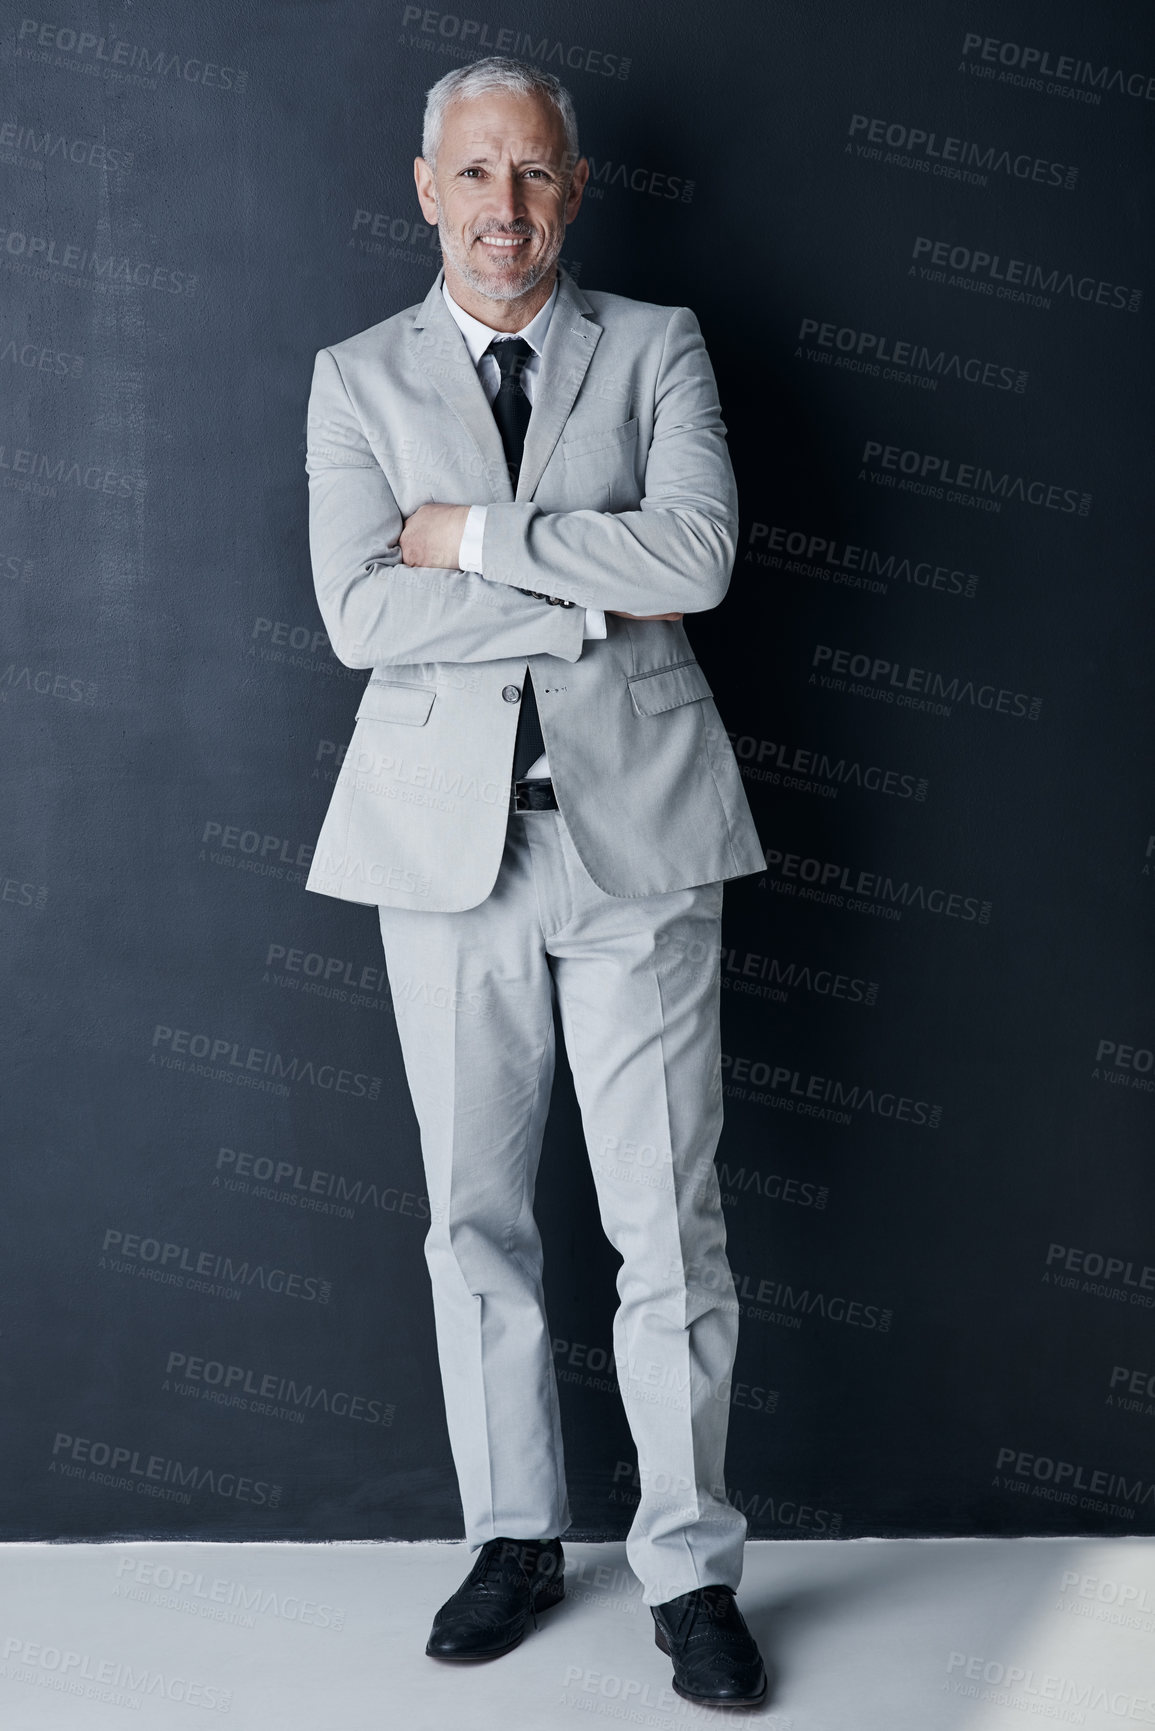 Buy stock photo Studio portrait of mature man in suit, arms crossed and smile on dark background. Confidence, pride and professional career for happy executive businessman or senior business owner or successful ceo.